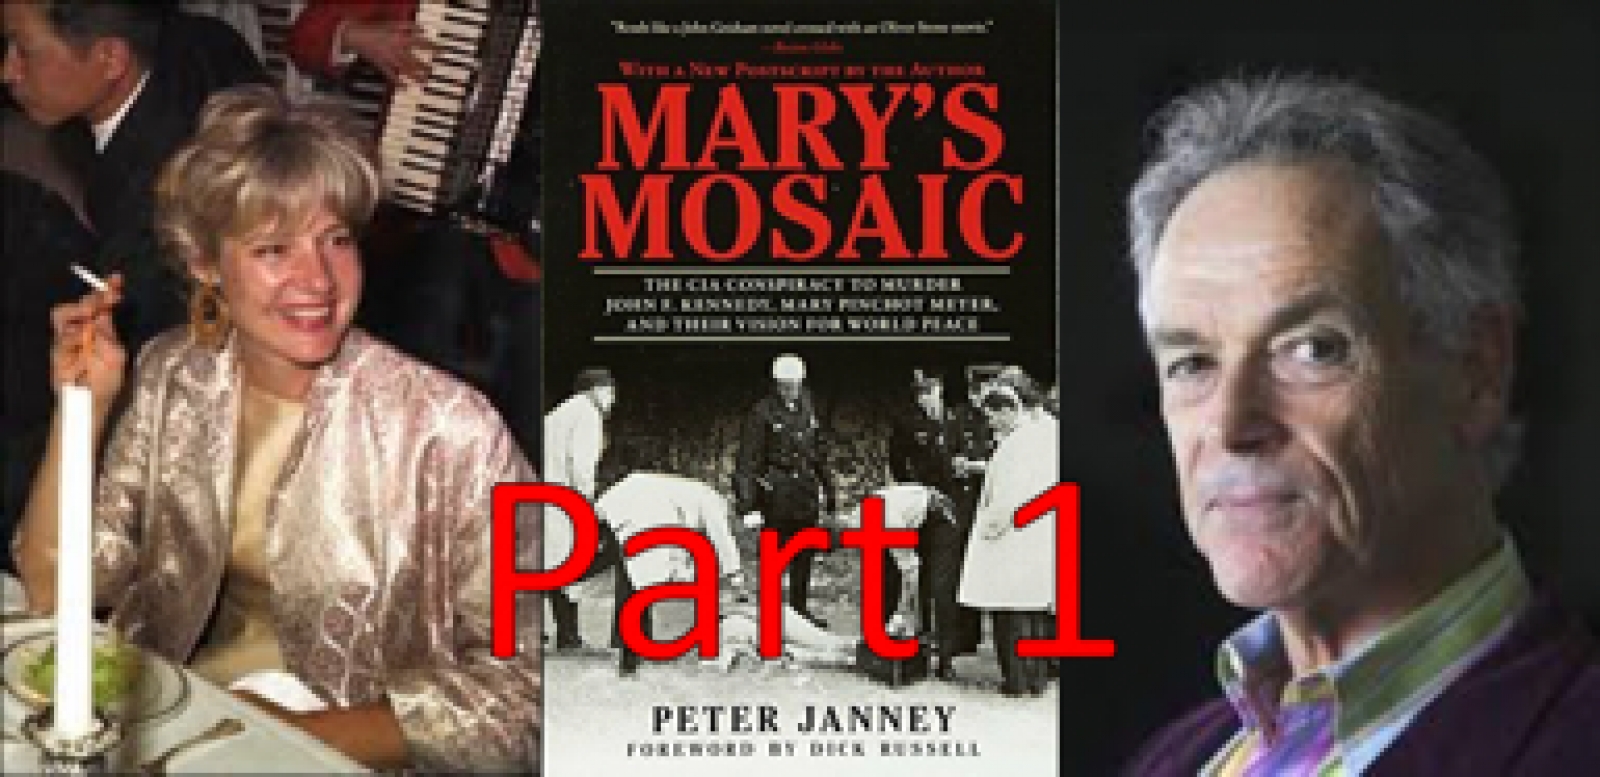 Peter Janney, Mary's Mosaic (Part 1)